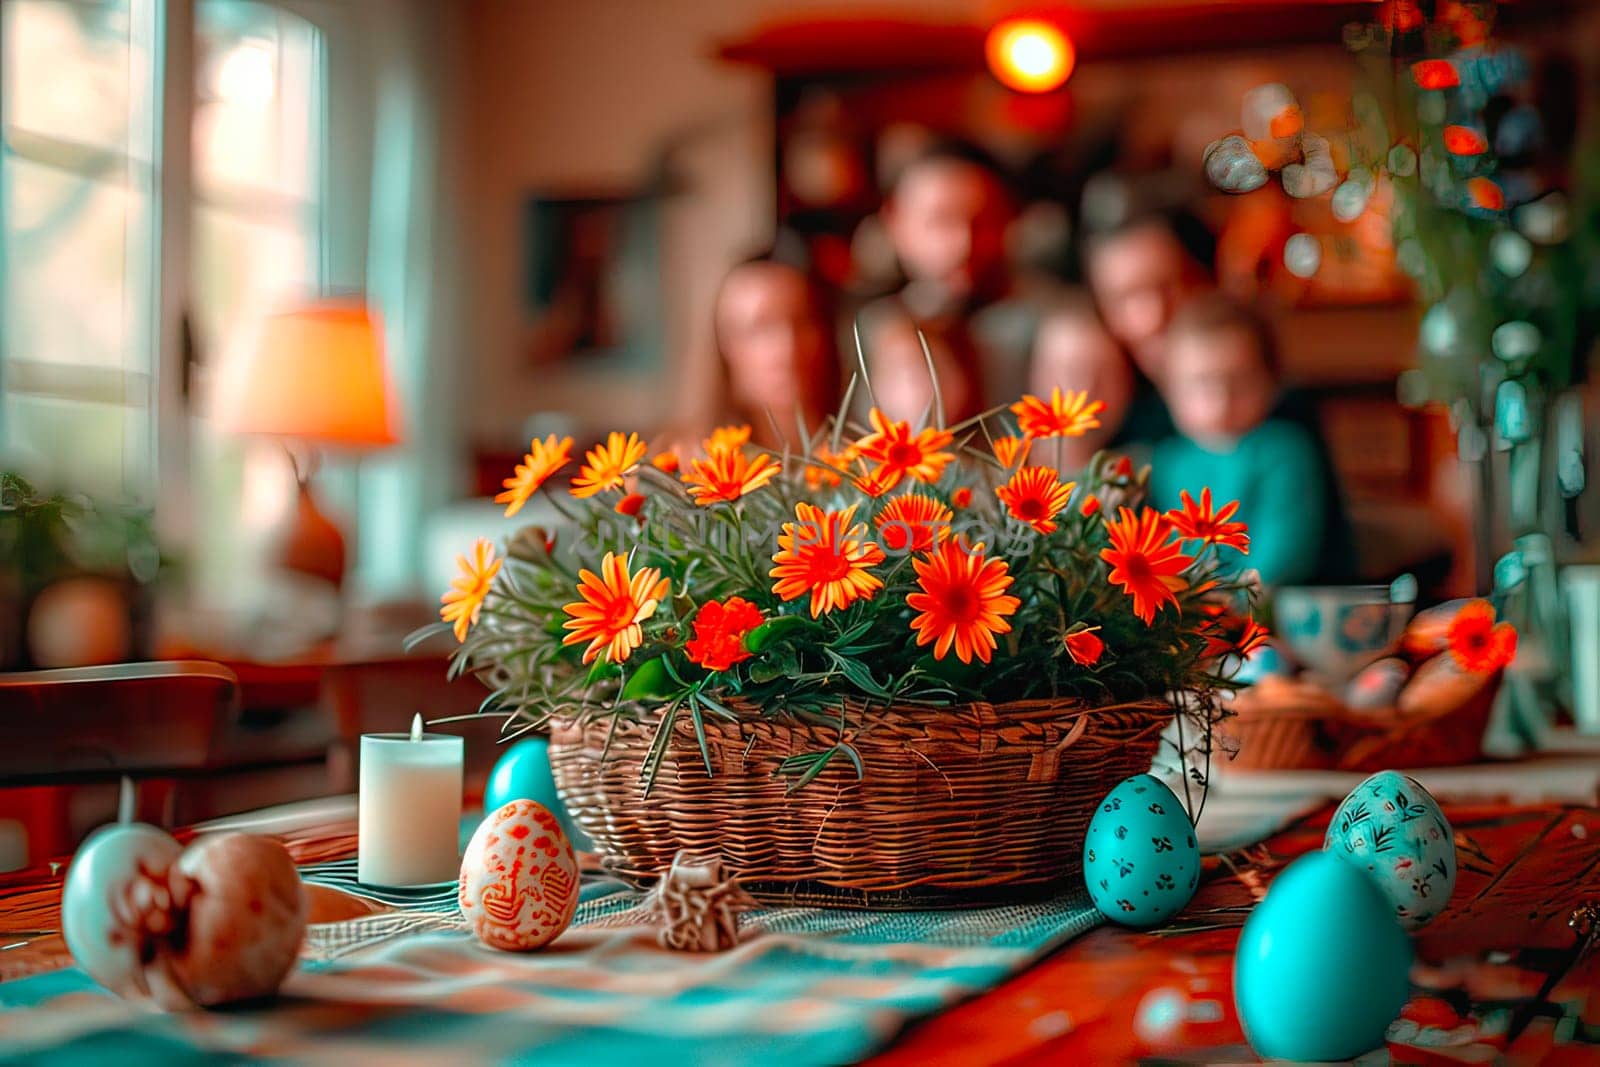 A wicker basket filled with orange flowers stands on a table in the room. Around the basket stand colourful Easter eggs. In the background you can see the blurred figures of several people standing side by side.